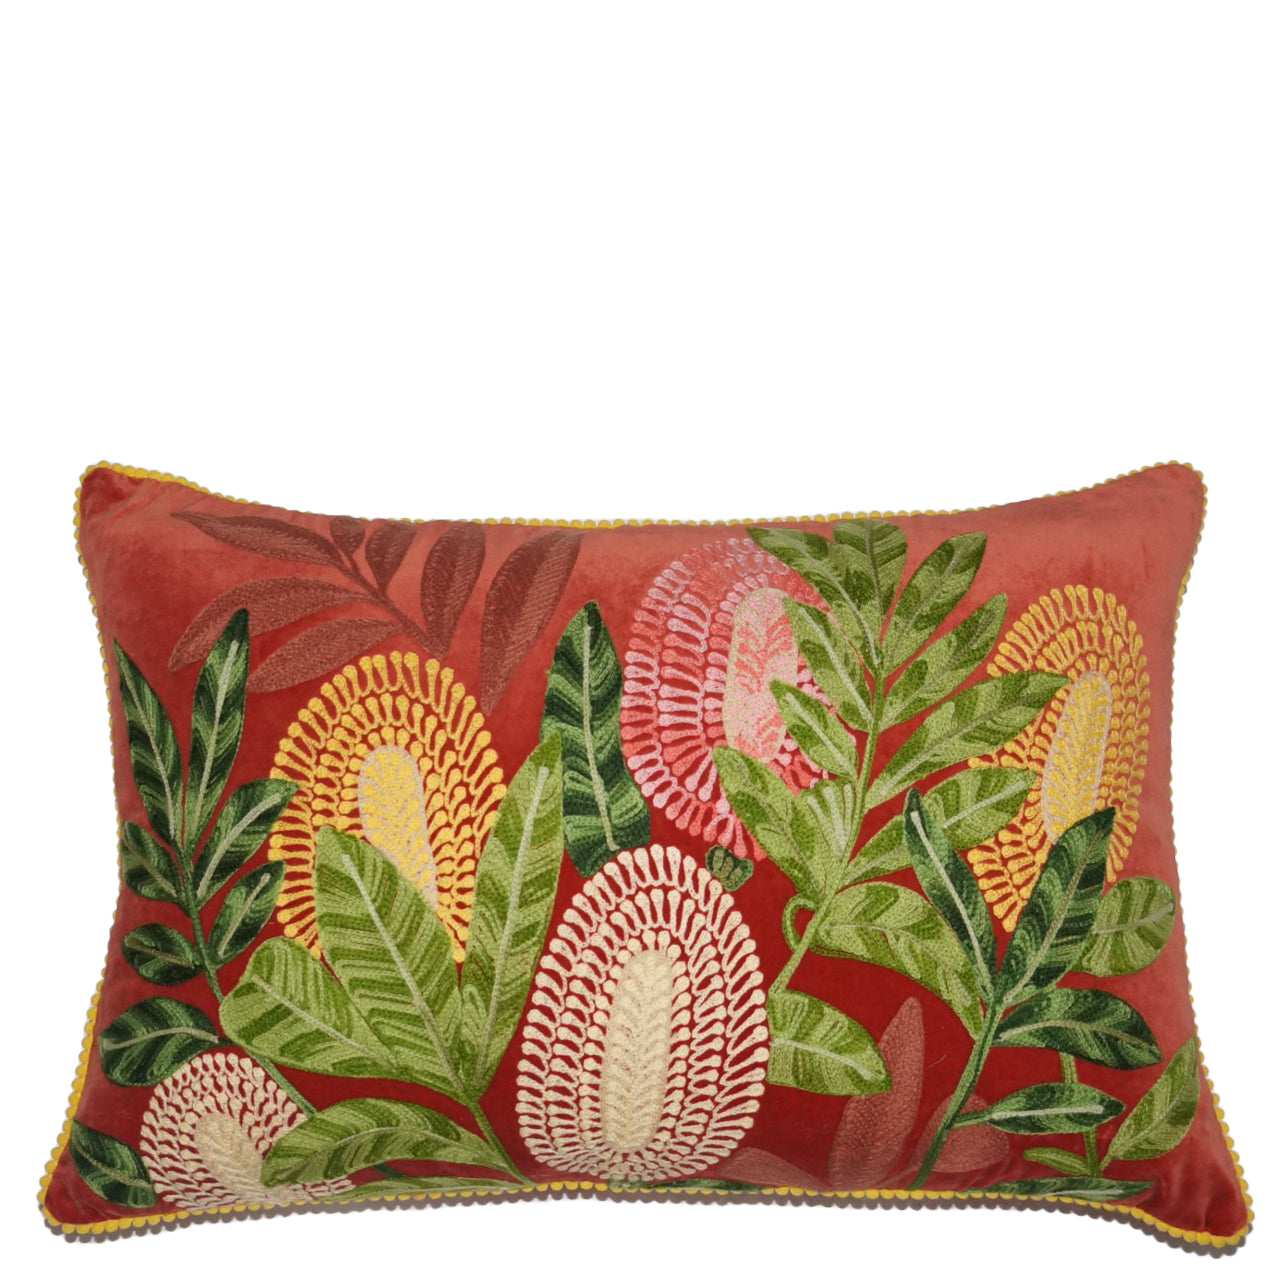 velvet cushion with banksia embroidery